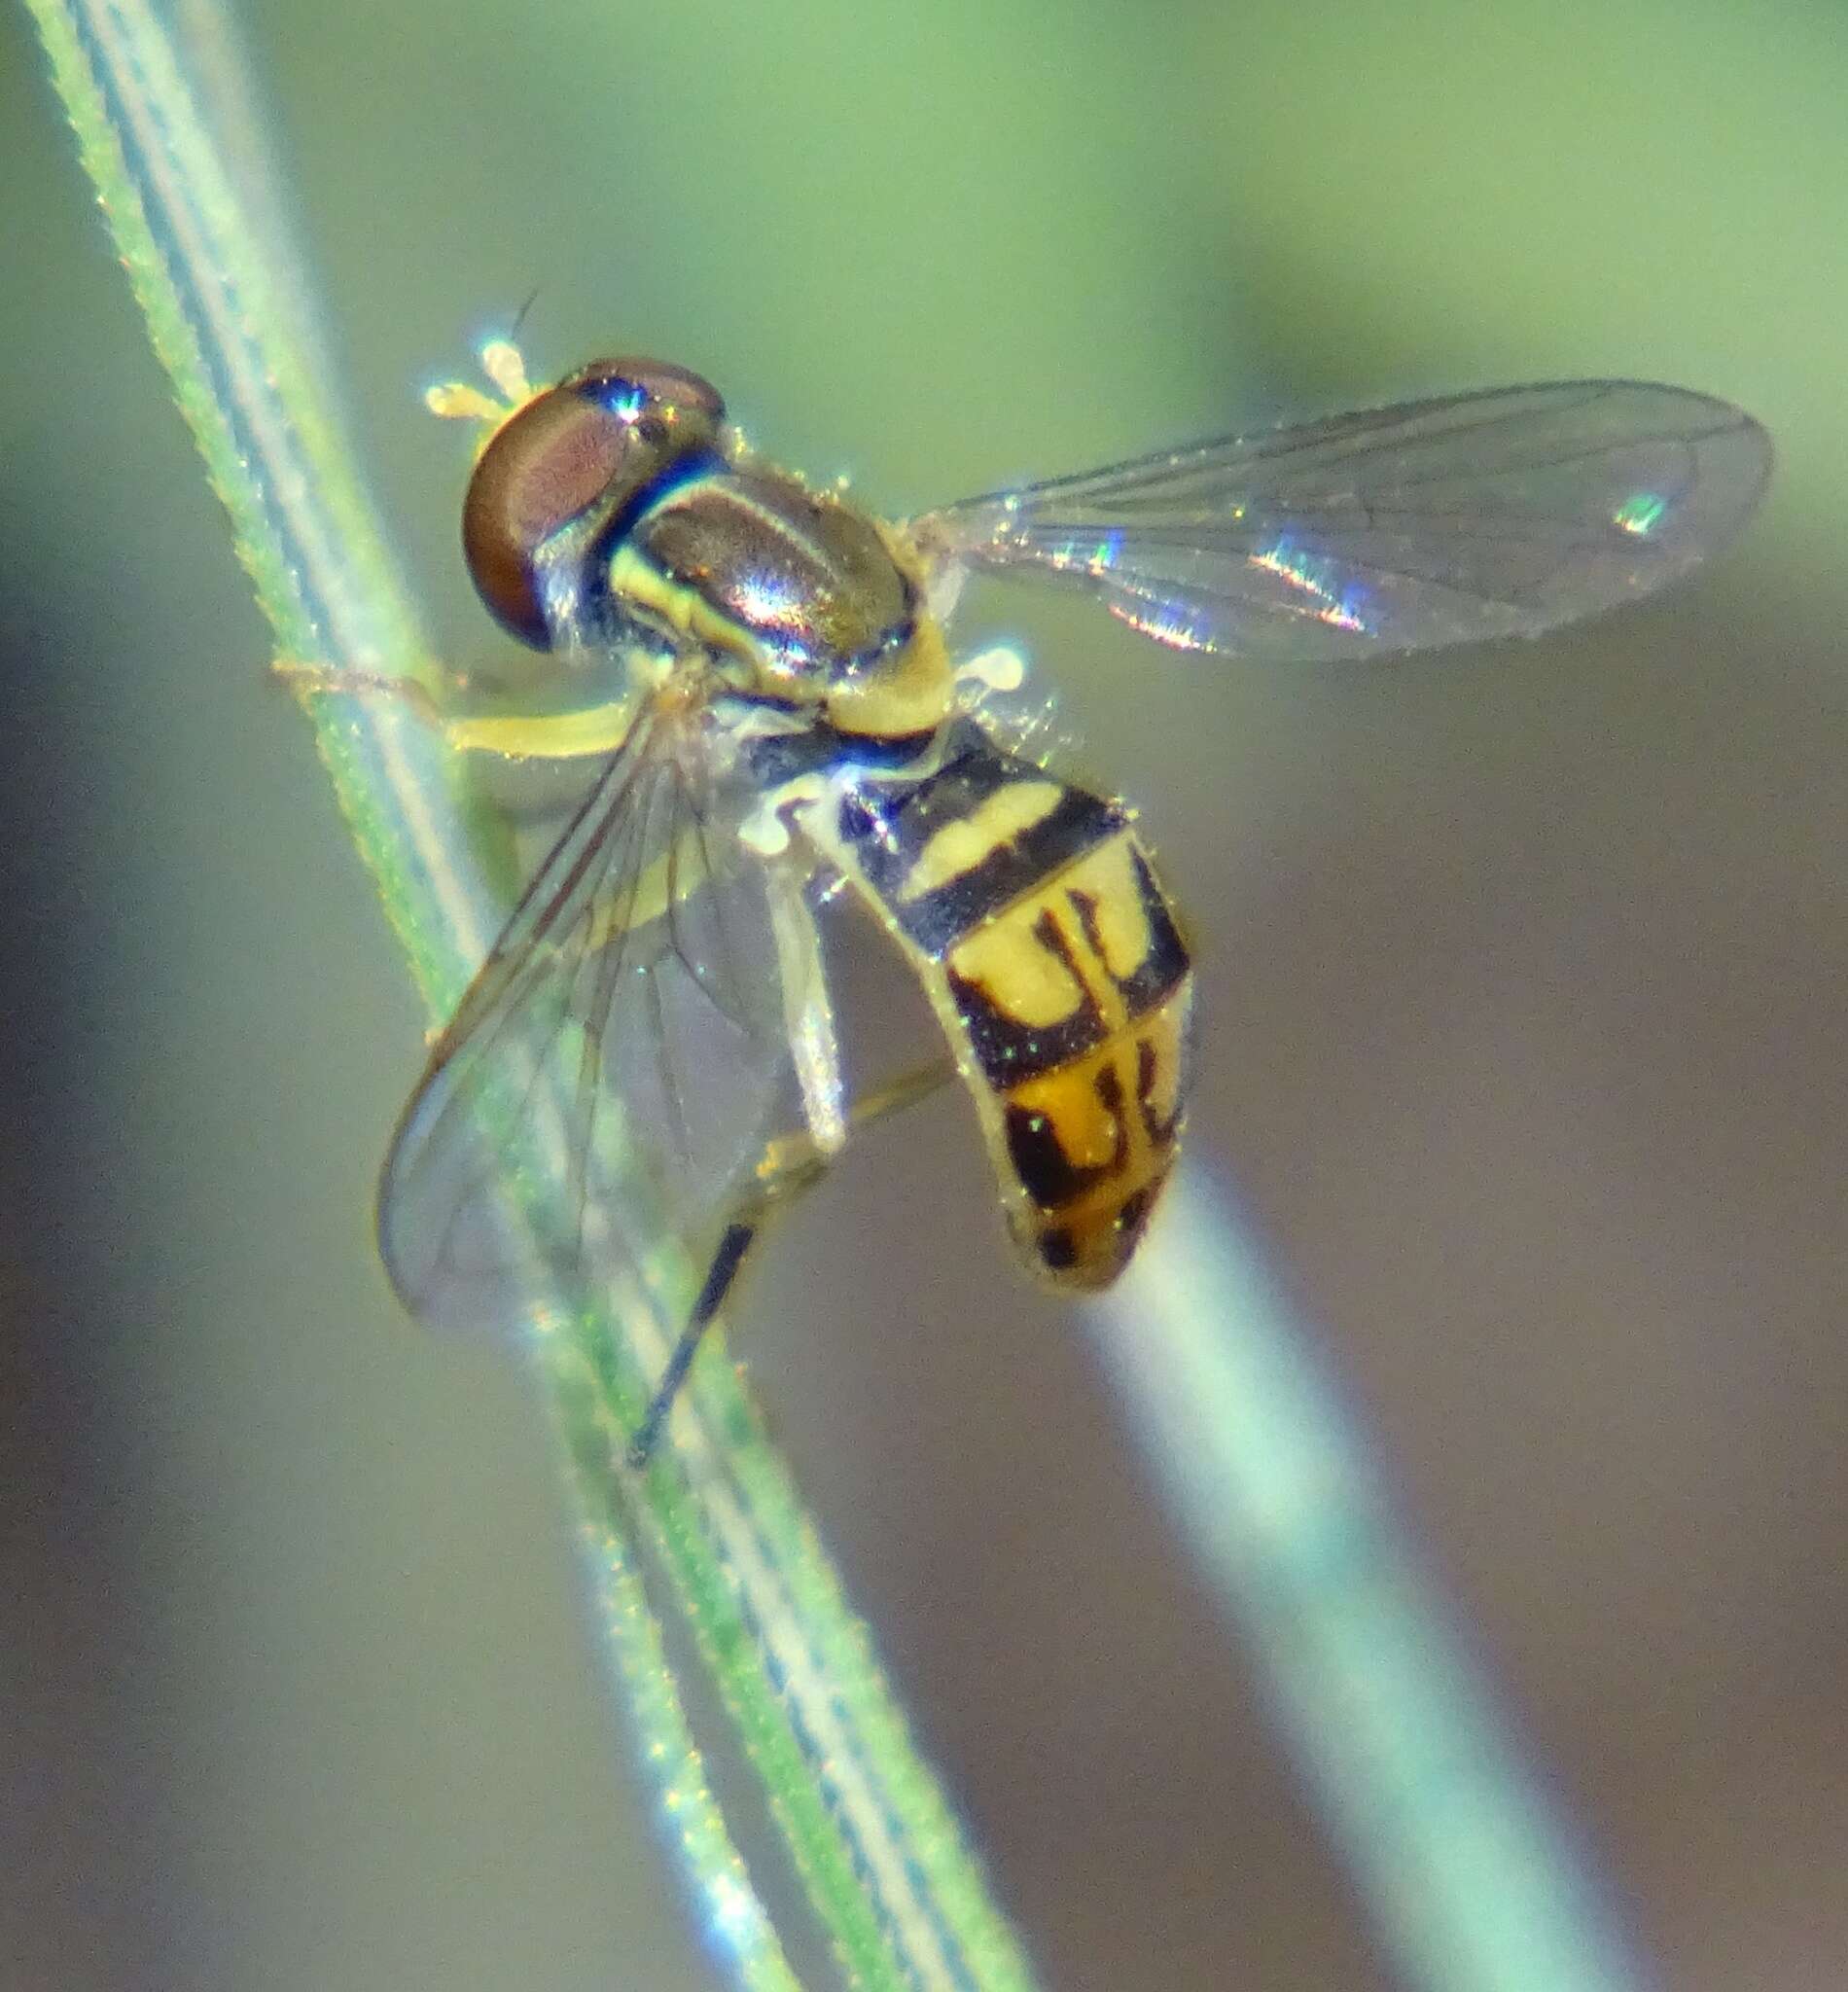 Image of Syrphid fly